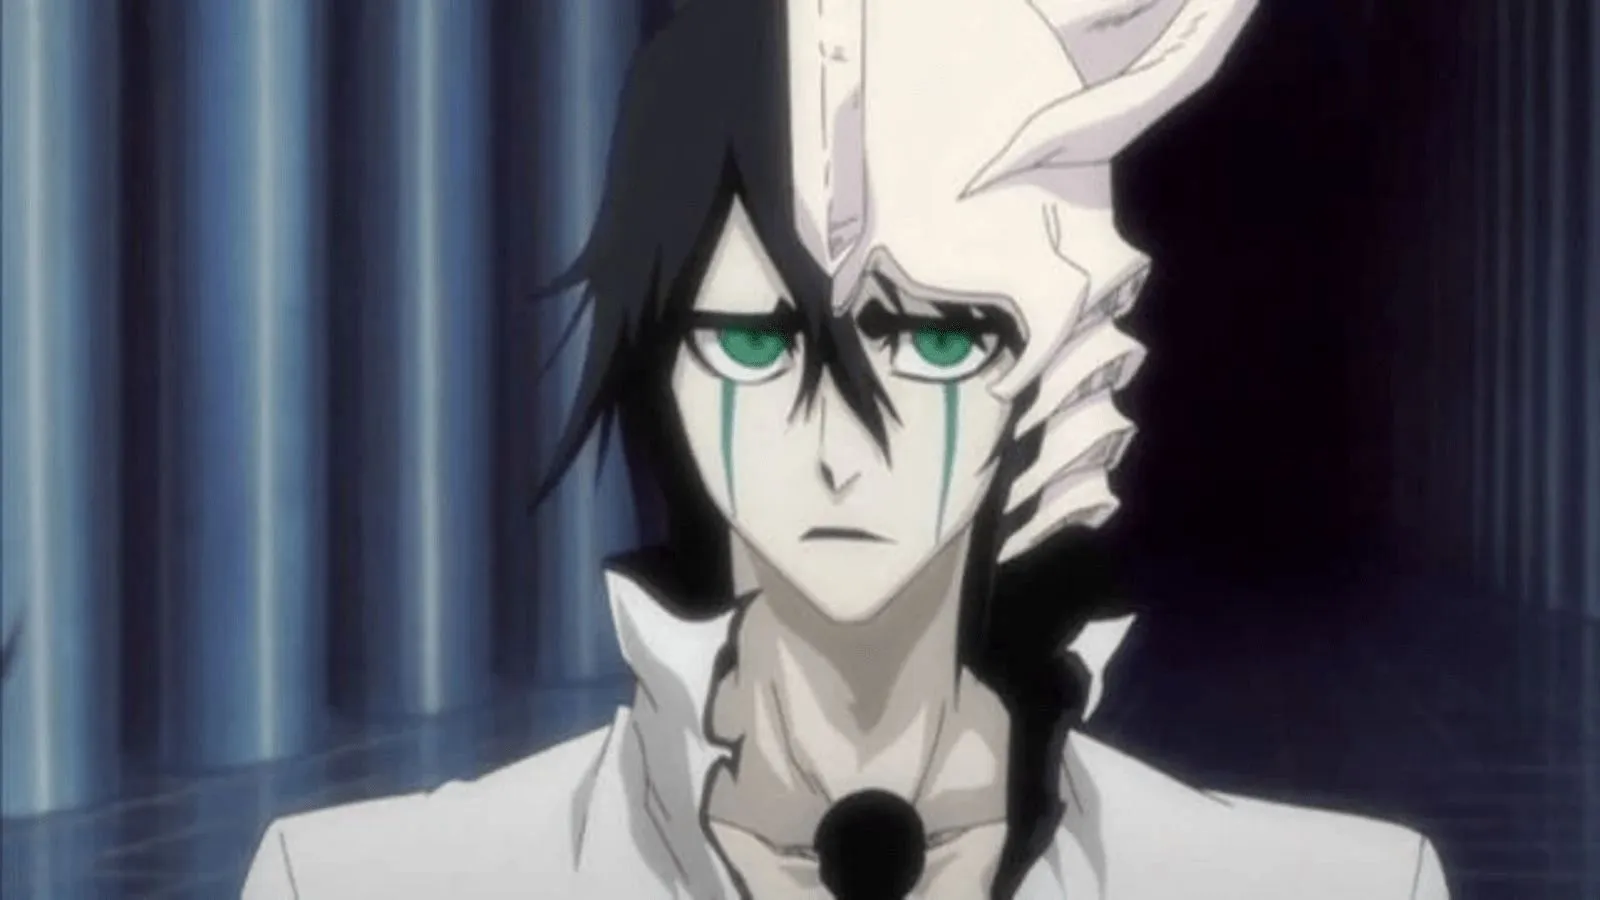 Ulquiorra Cifer, who's one of the most interesting Bleach characters(image via Studio Pierrot)